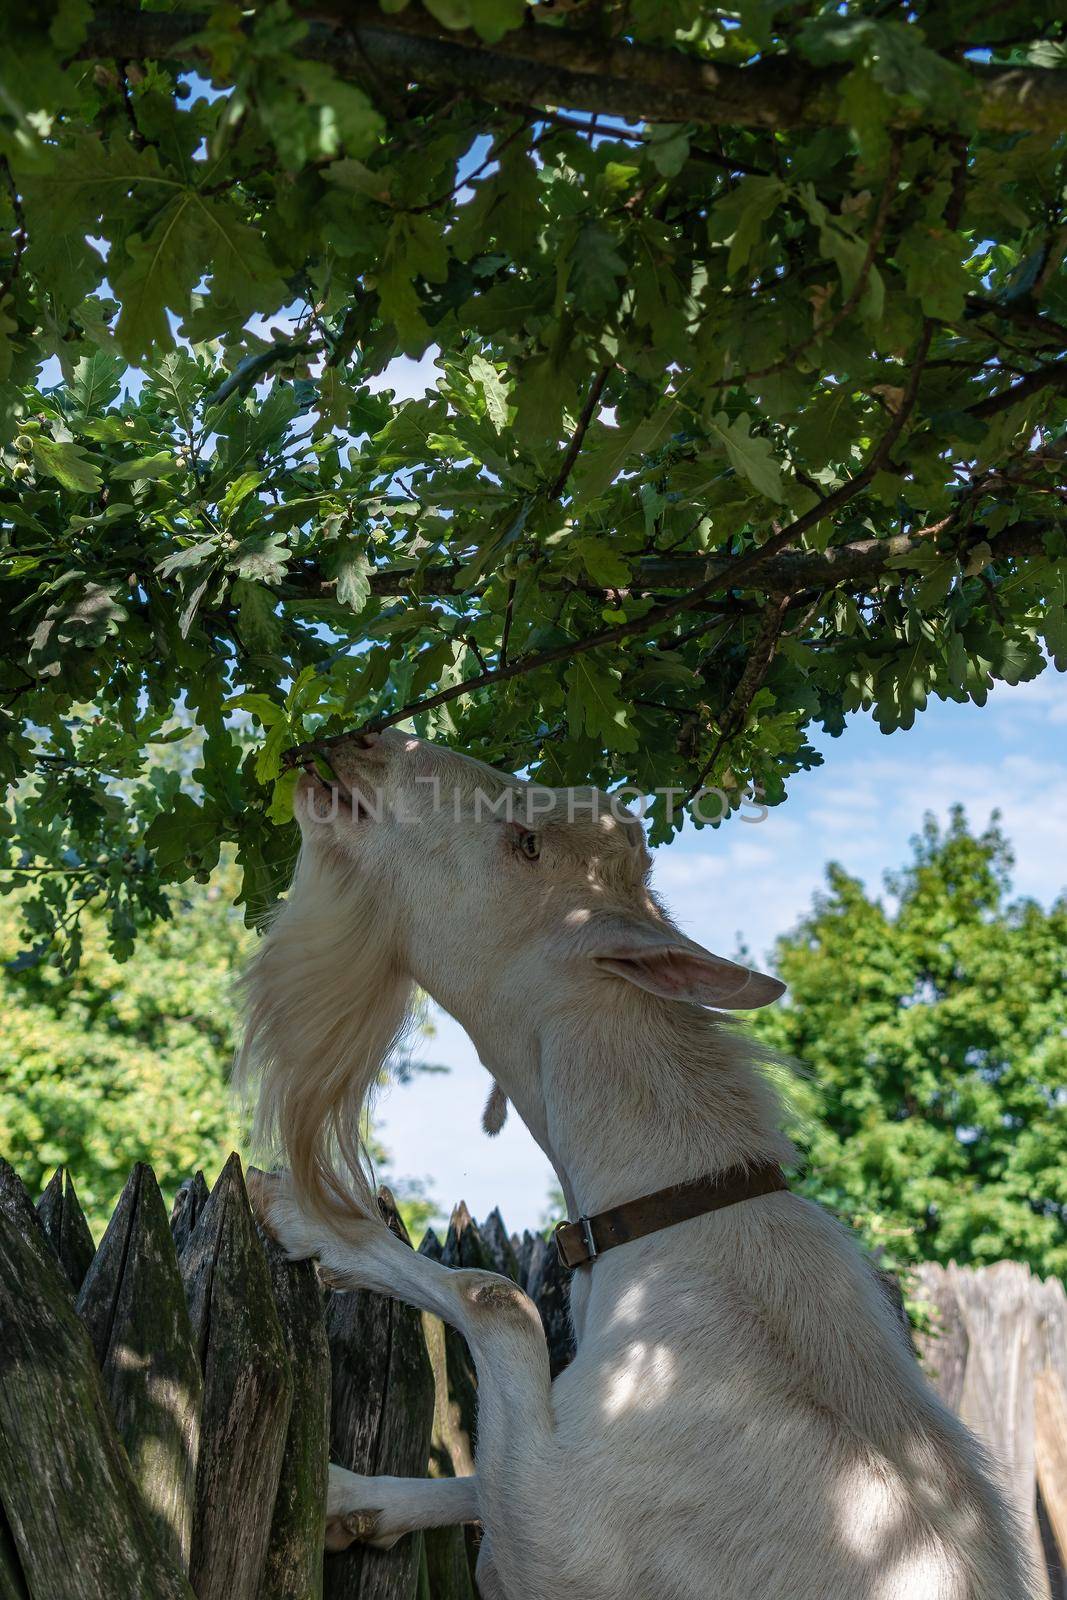 Example of agriculture in the Modra open-air museum. A goat leaning against a fence is grazing on a tree branch, head detail